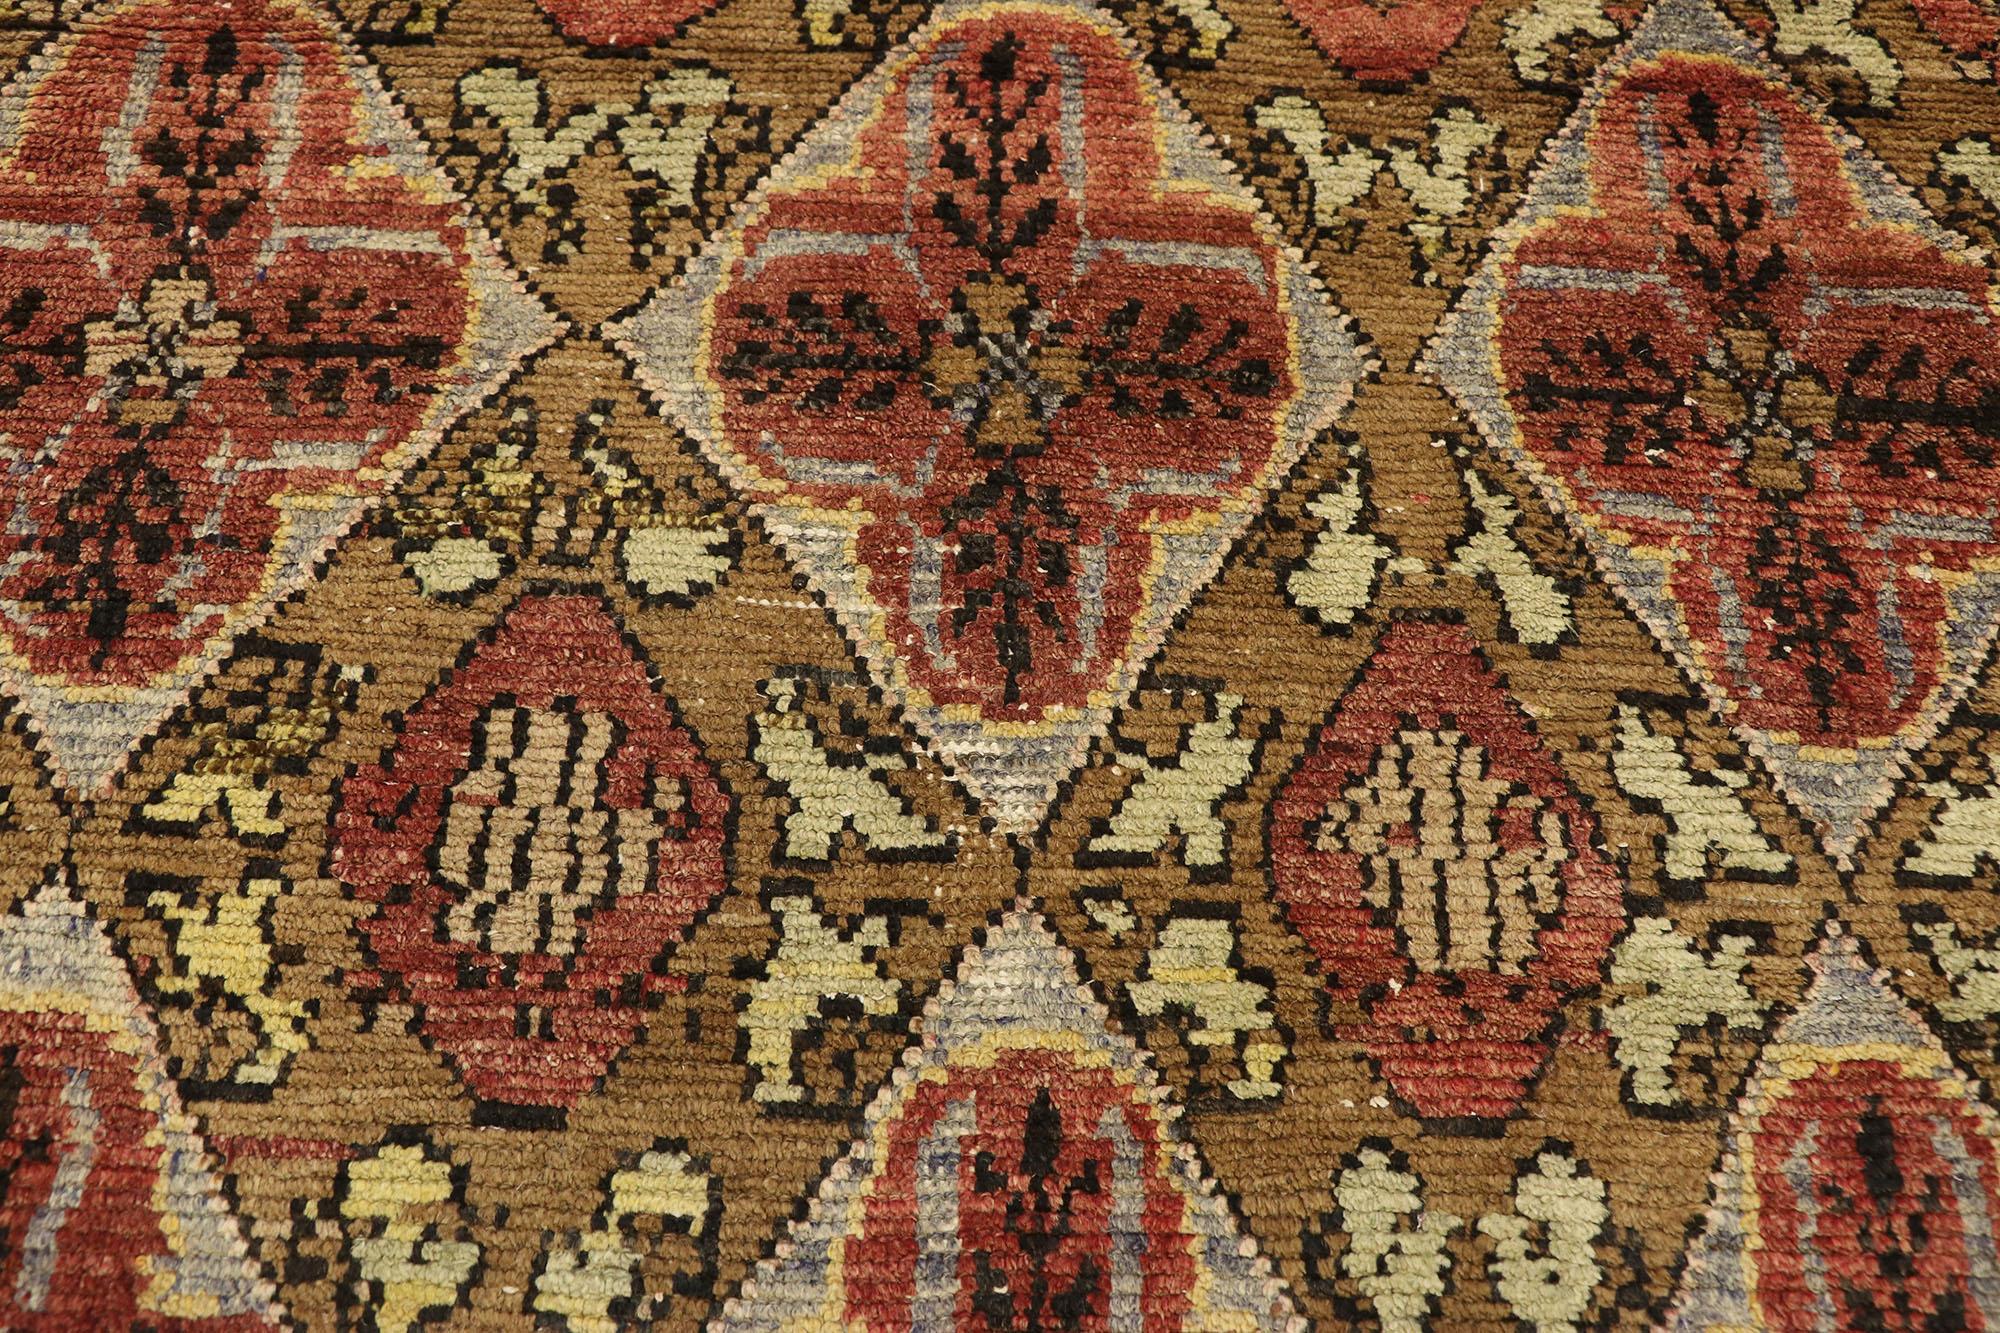 Vintage Turkish Oushak Rug with Rustic Elizabethan Style In Good Condition For Sale In Dallas, TX